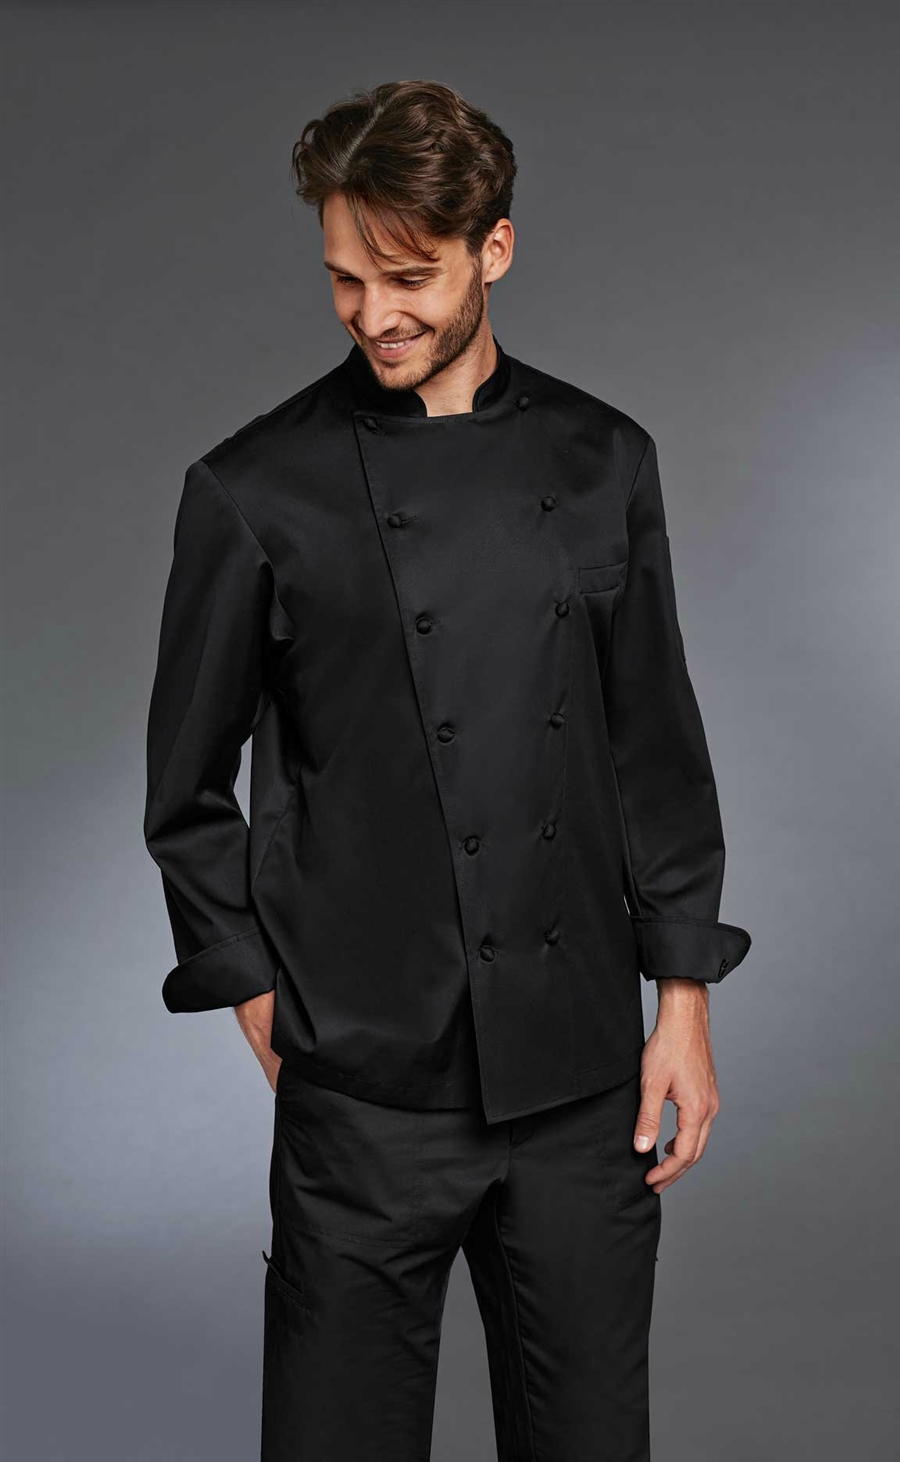 Bragard Mens Grand Chef Jacket Without Pocket